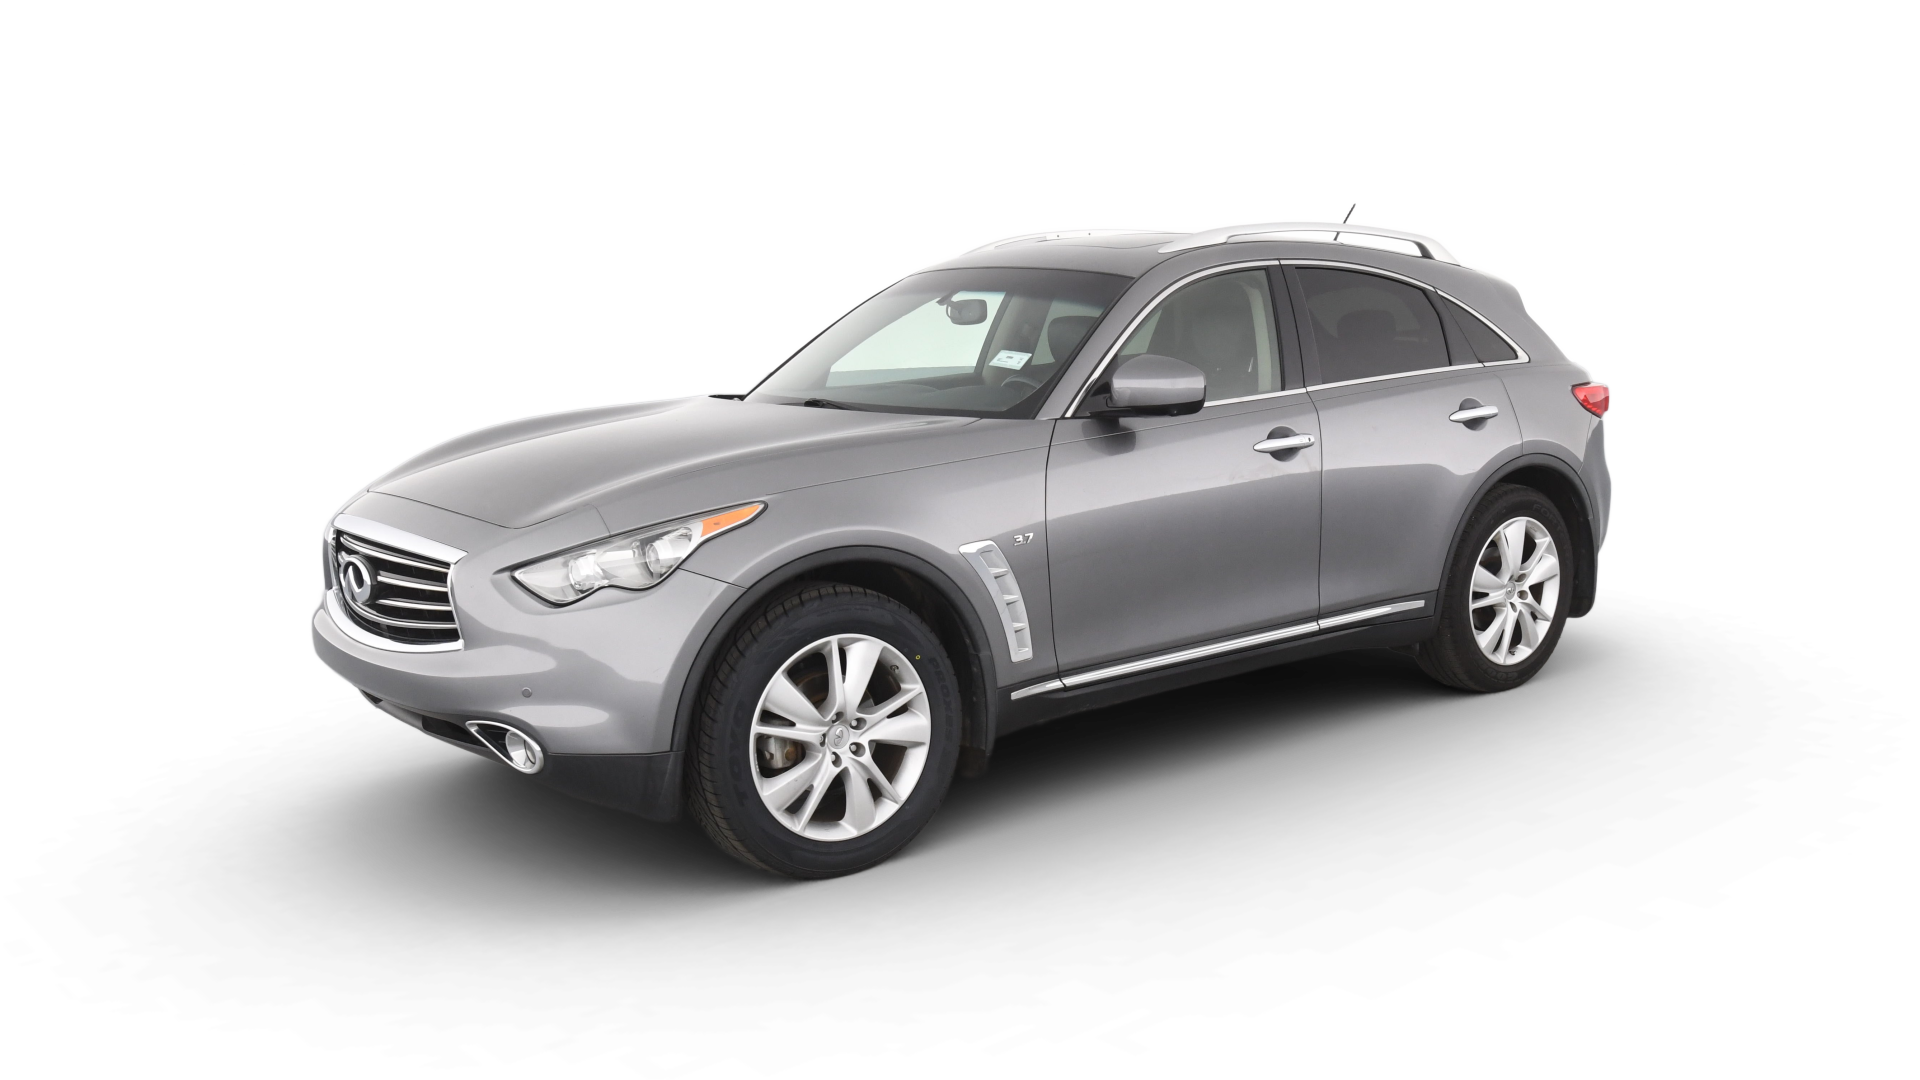 Used INFINITI QX70 For Sale Online | Carvana